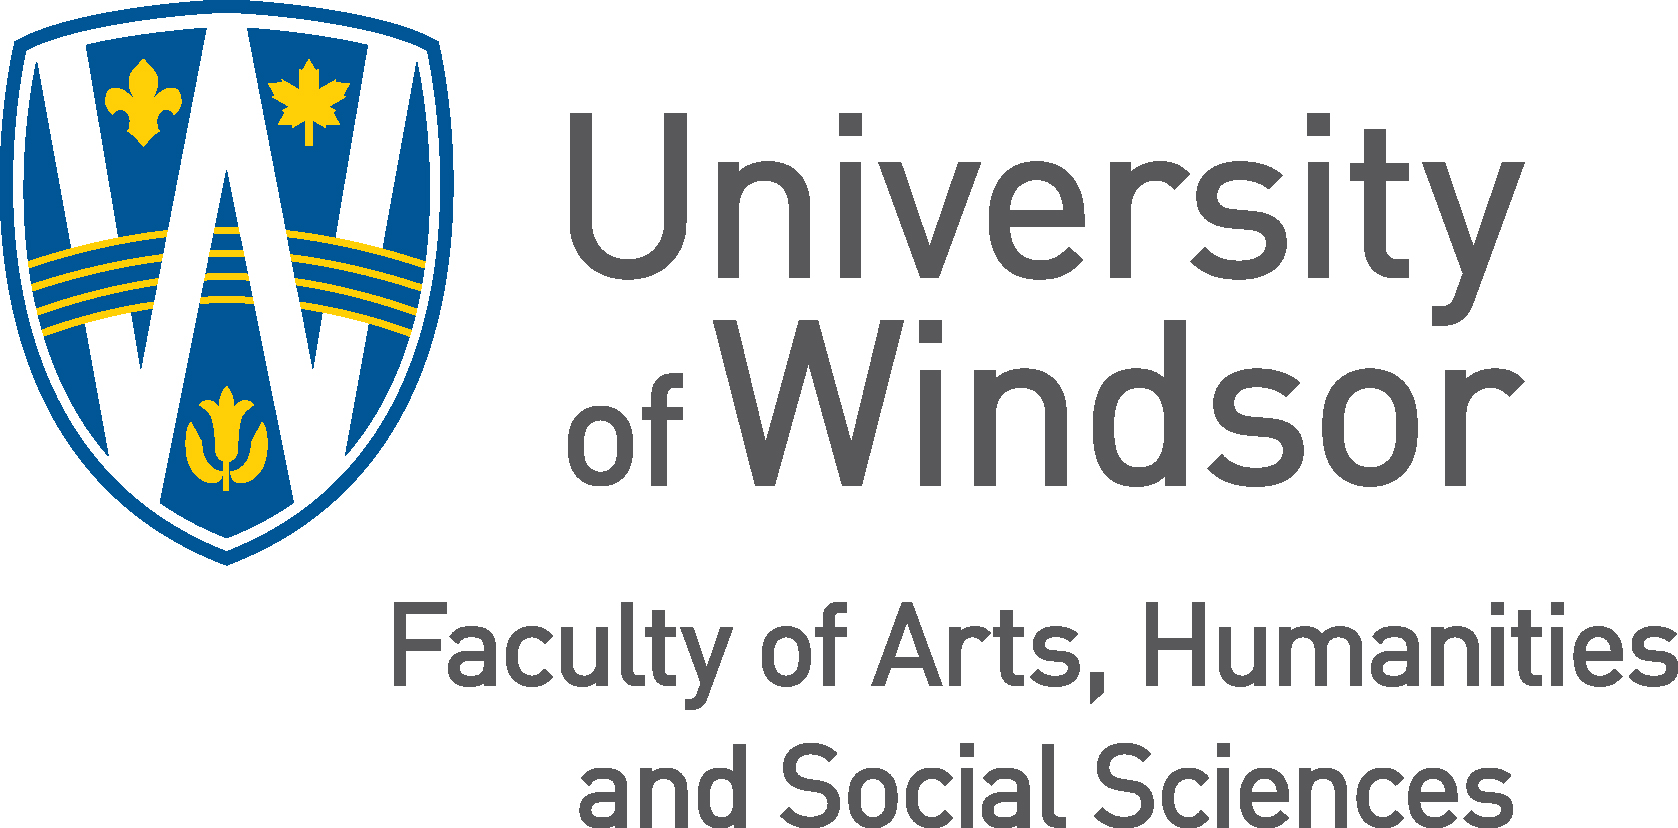 UWindsor shield and logo text for the Faculty of Arts, Humanities, and Social Sciences